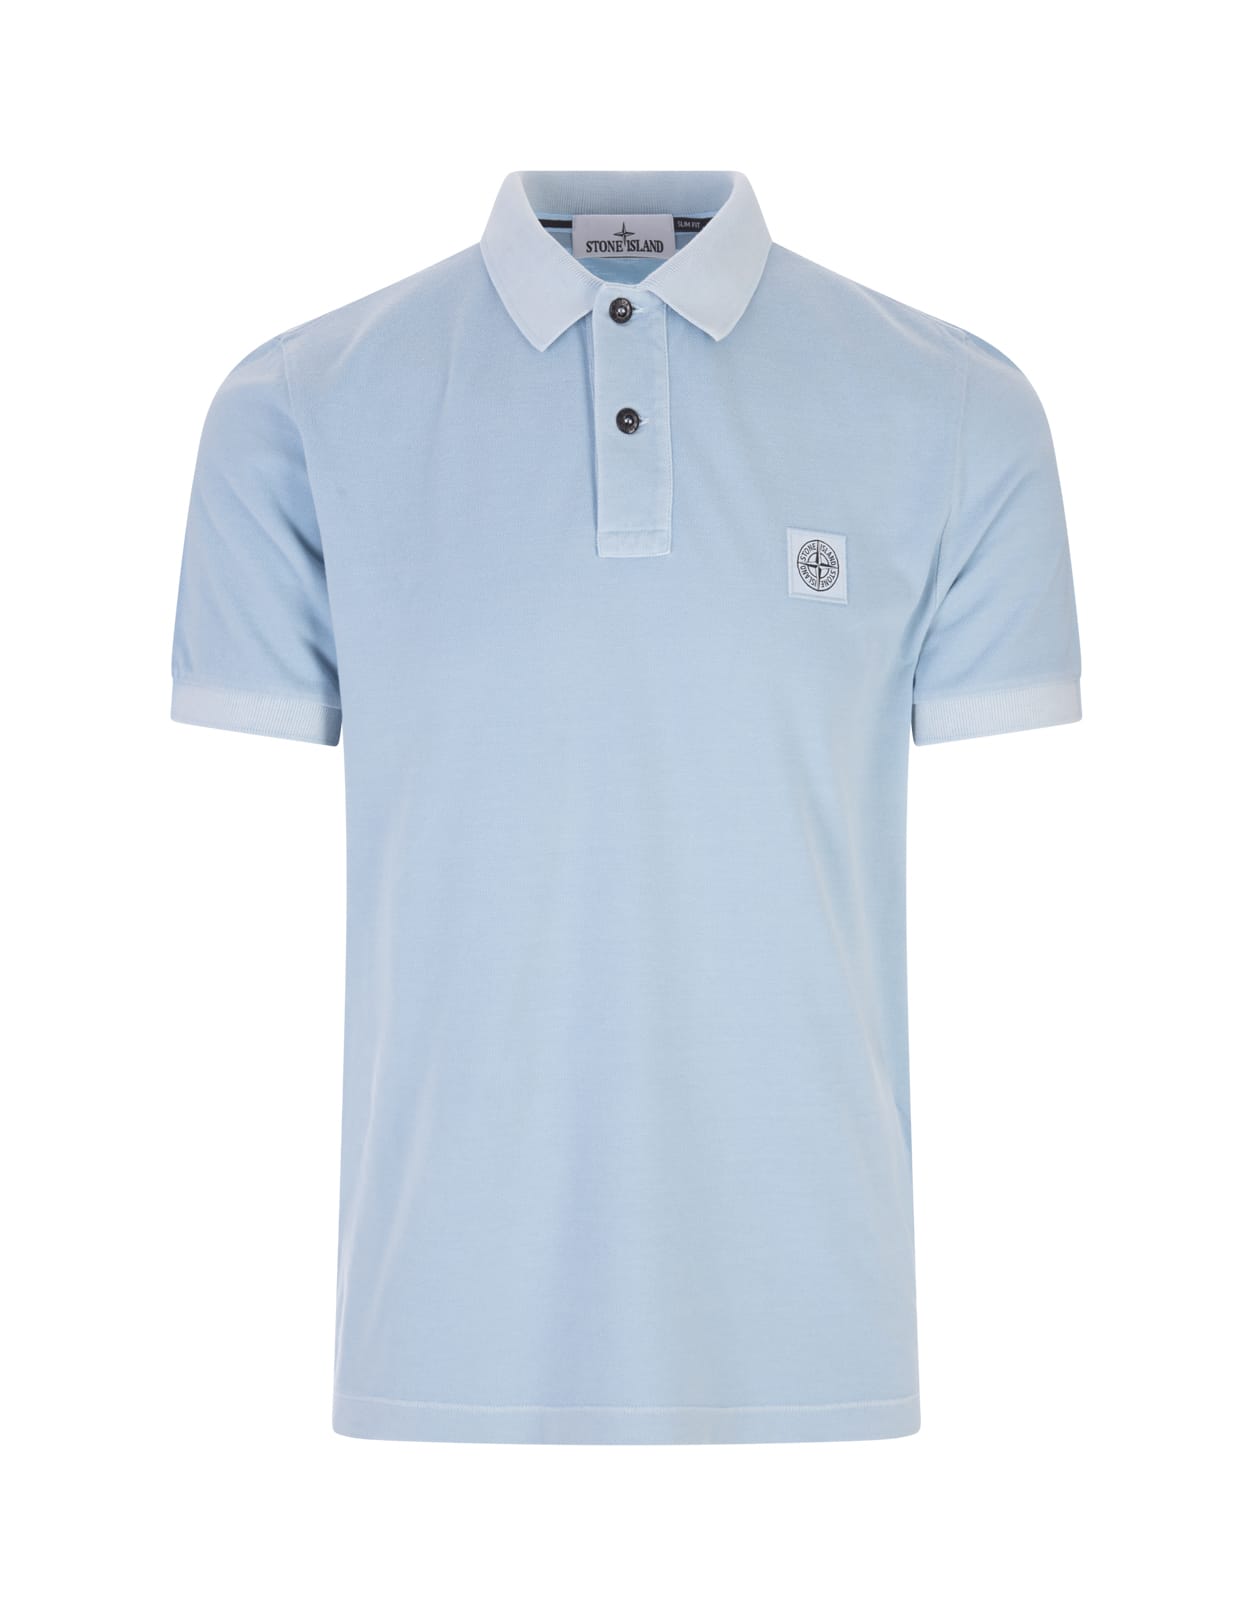 STONE ISLAND LIGHT BLUE PIGMENT DYED SLIM FIT POLO SHIRT